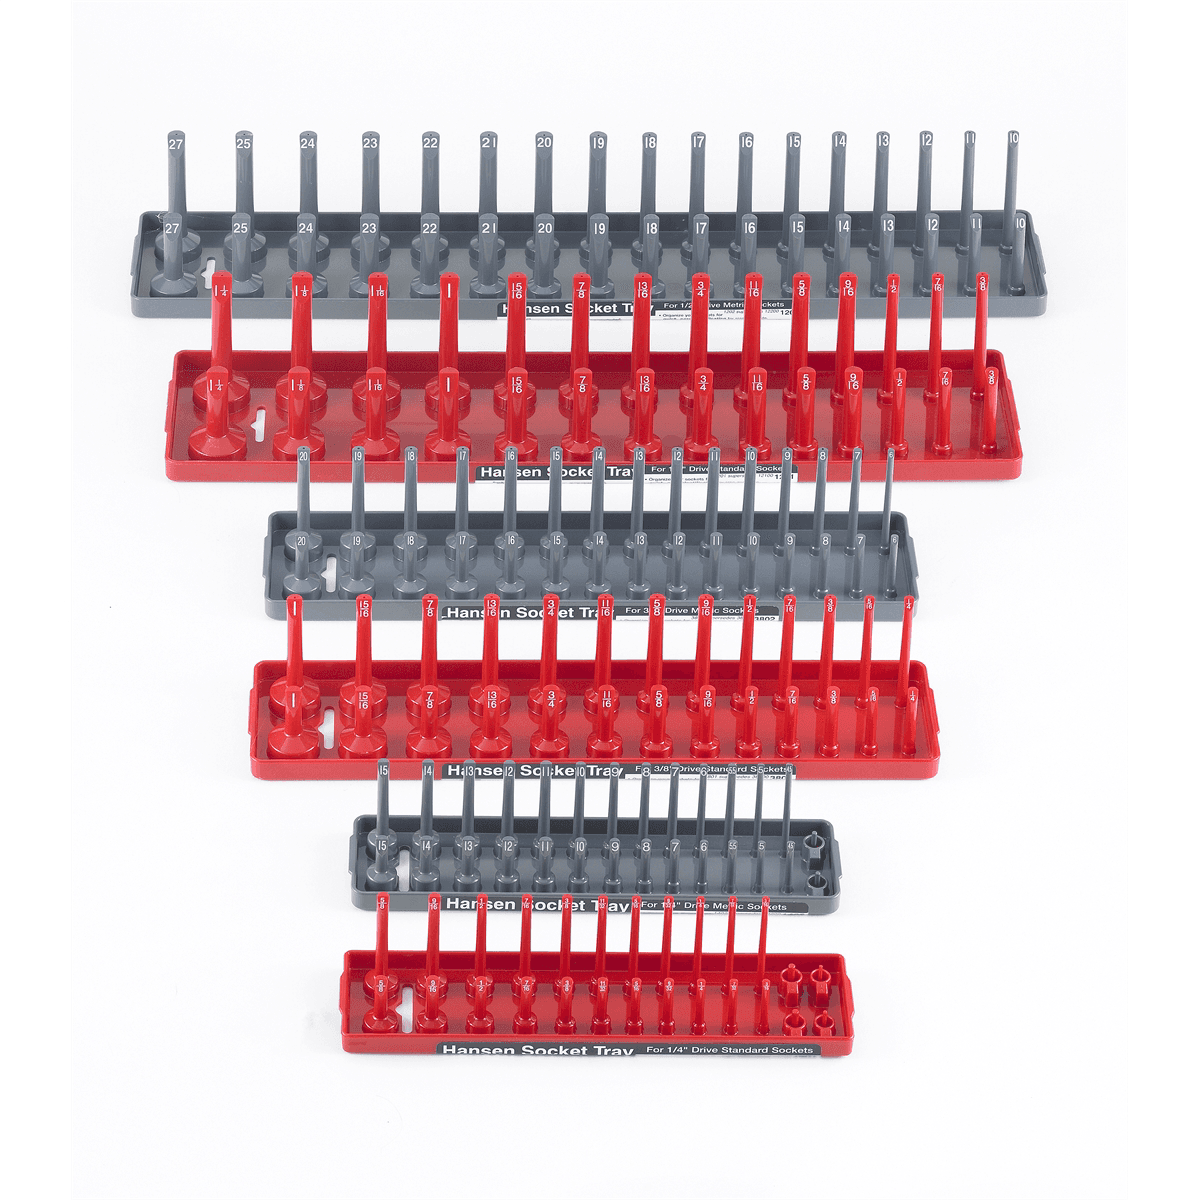 92000 Soc Tray 6-Pack Assortment, Red/Gray